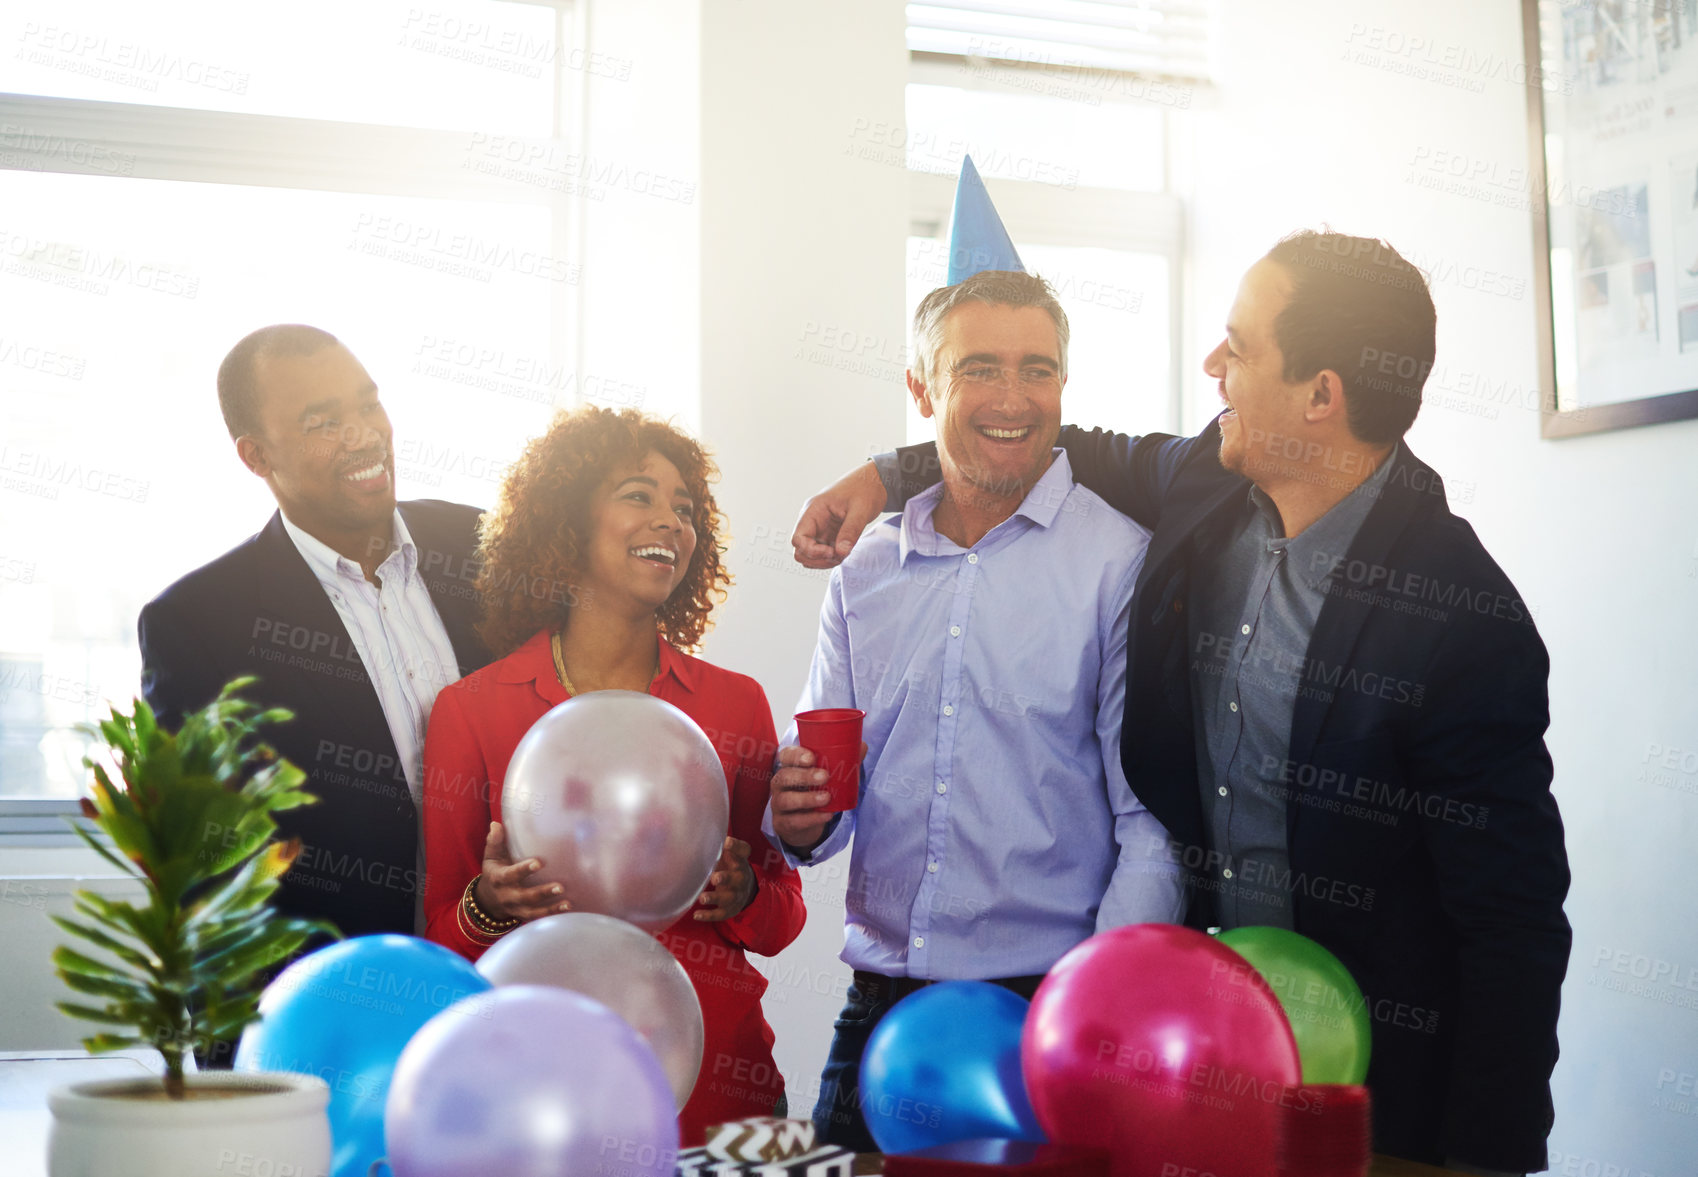 Buy stock photo Shot of a coworkers having a office birthday party